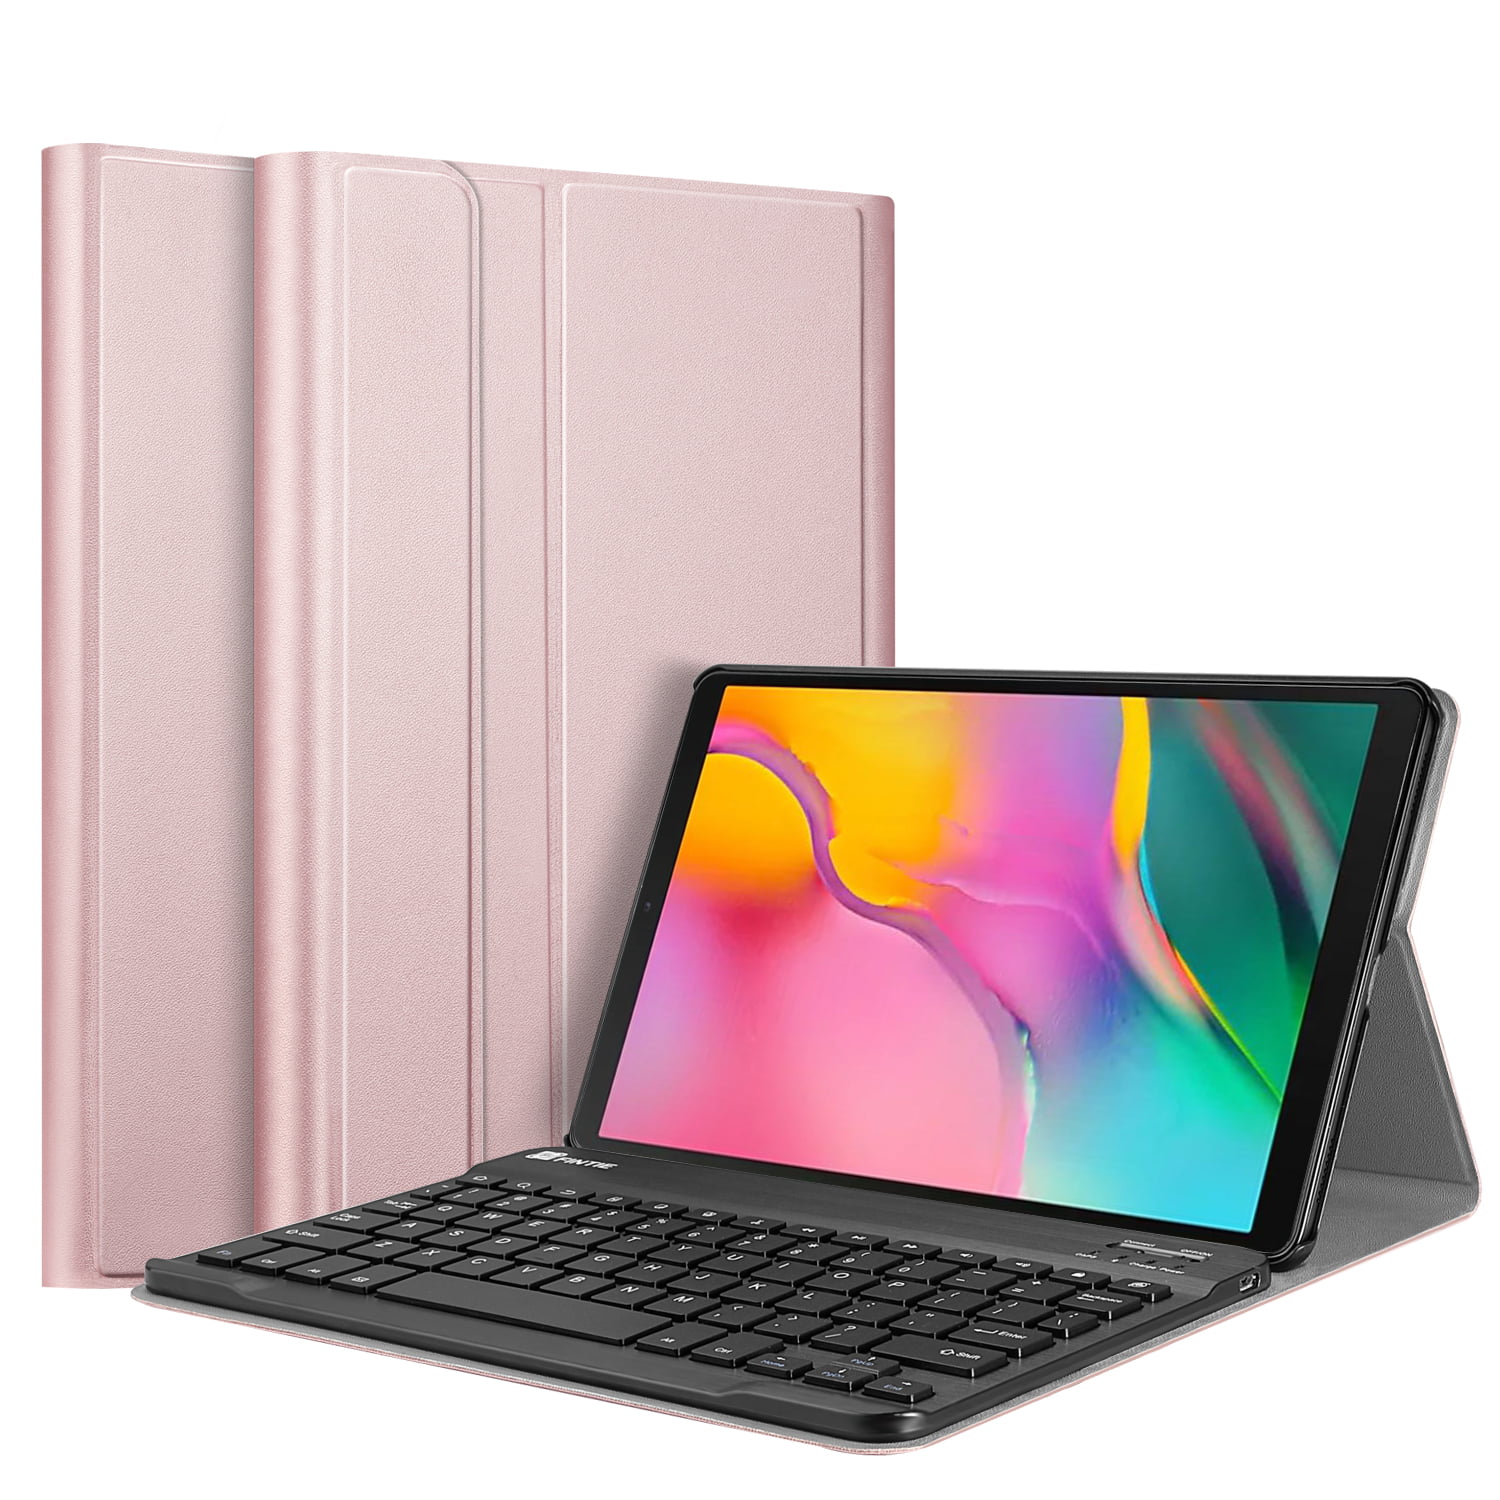 Gold Ultra Slim Flip with Removable Wireless Keyboard Stand Case Cover for Samsung Galaxy Tab A T515/T510 10.1 inch 2019 Tablet RLTech Keyboard Case for Samsung Galaxy Tab A 10.1 2019 